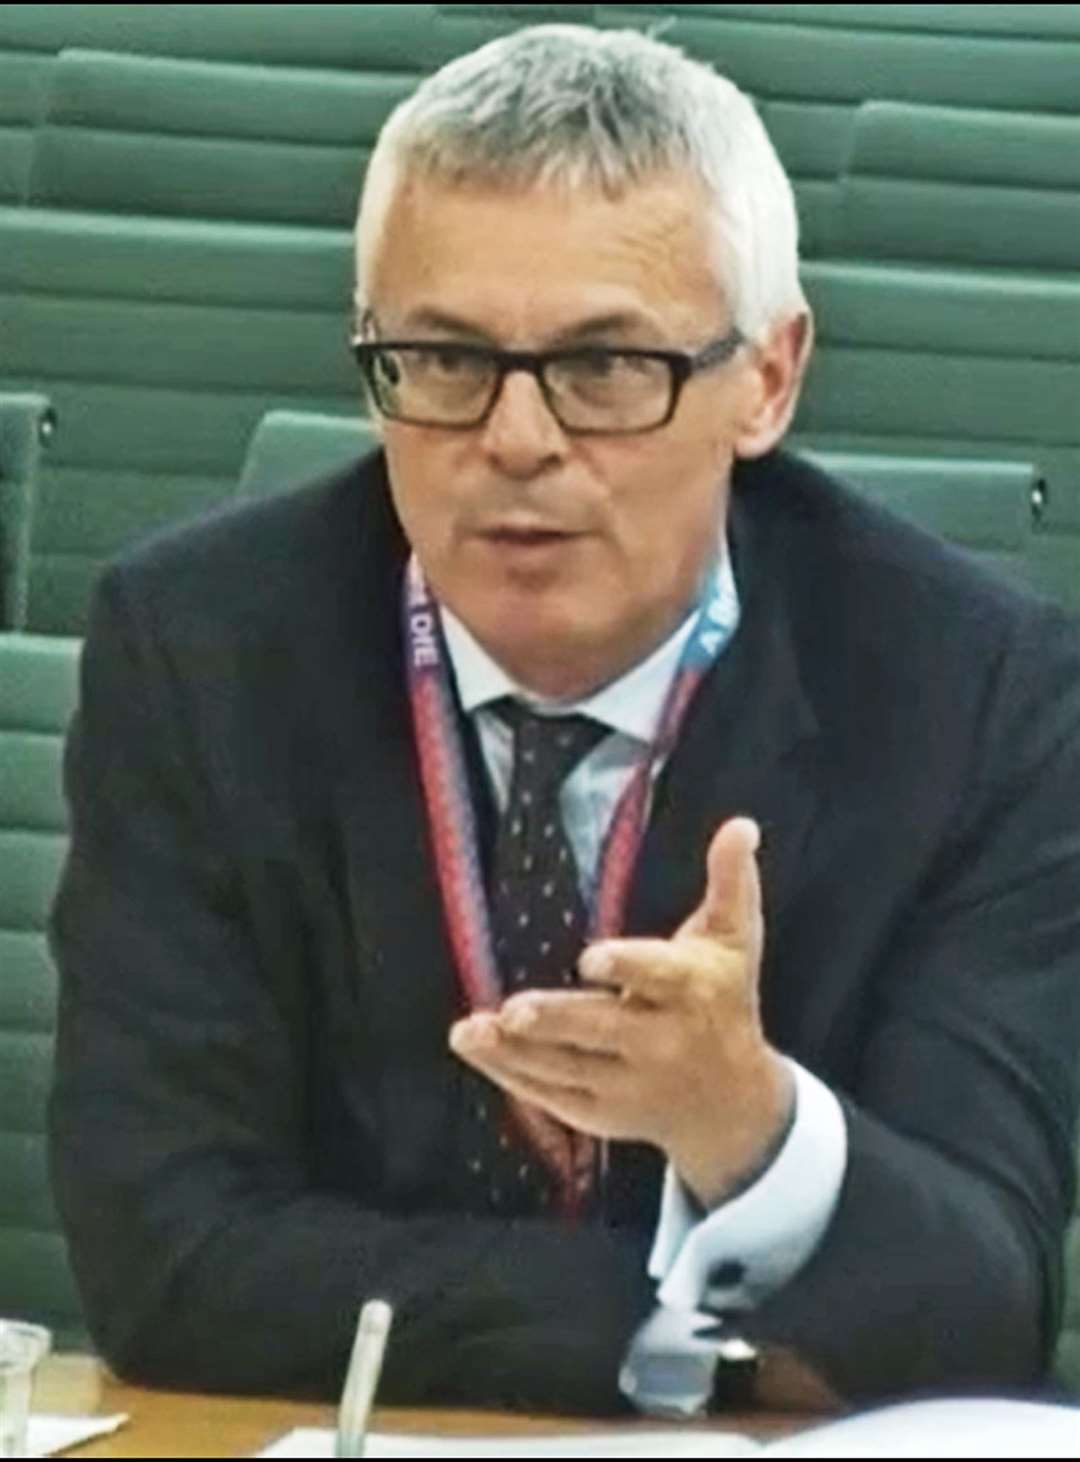 Jonathan Slater was removed as permanent secretary at the Department for Education last week (House of Commons/PA)